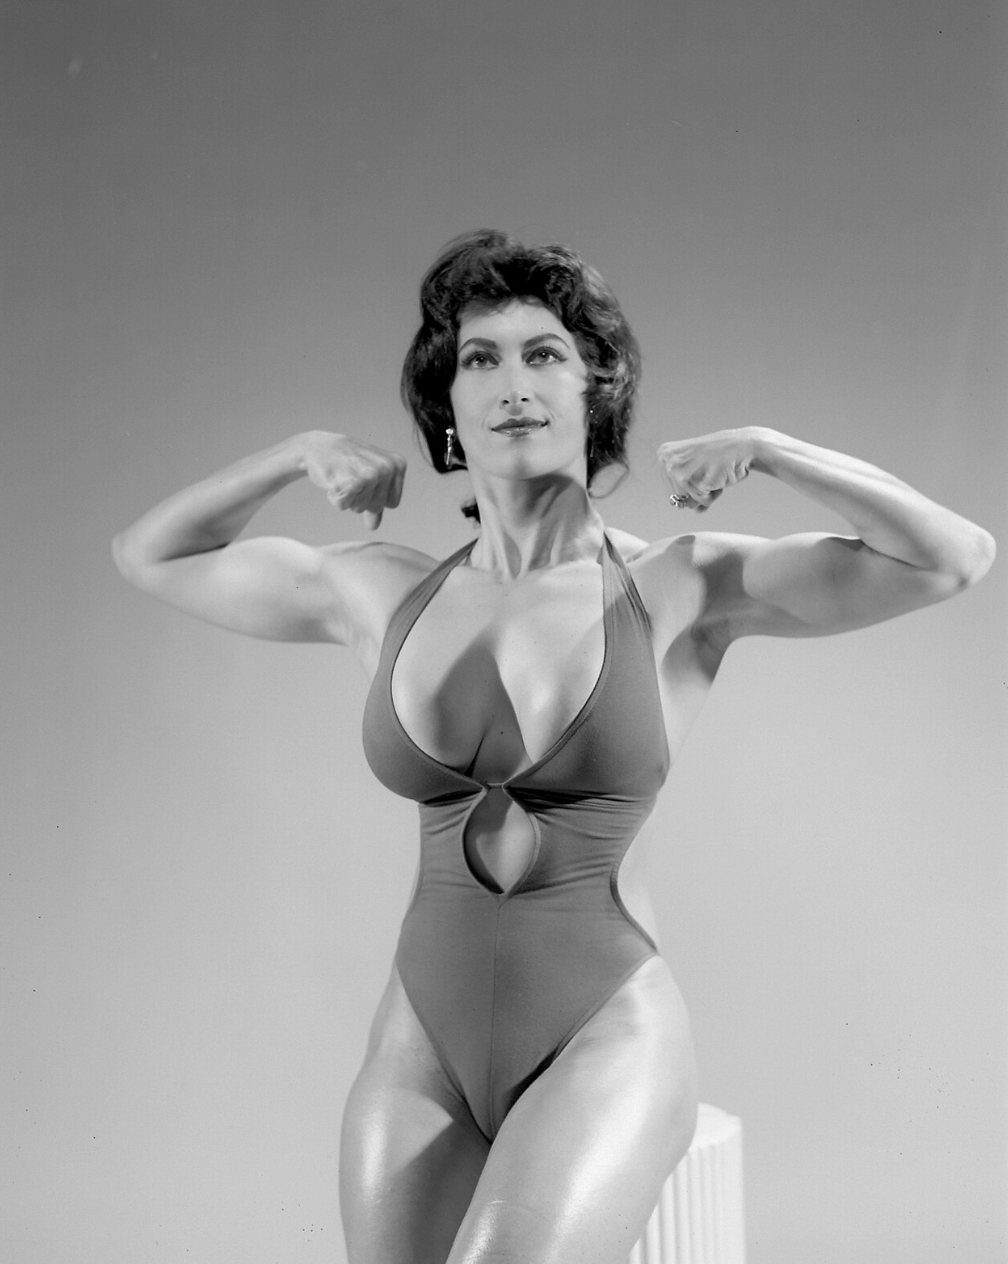 “TIL of Rasa von Werder, popularized female bodybuilding, competing along with Arnold in ‘Best Body’ competitions. She also worked as a [dancer] and minister, later creating her own church. In 2008 she ended 30 years of religious celibacy because God told her to become a ‘cougar.’”